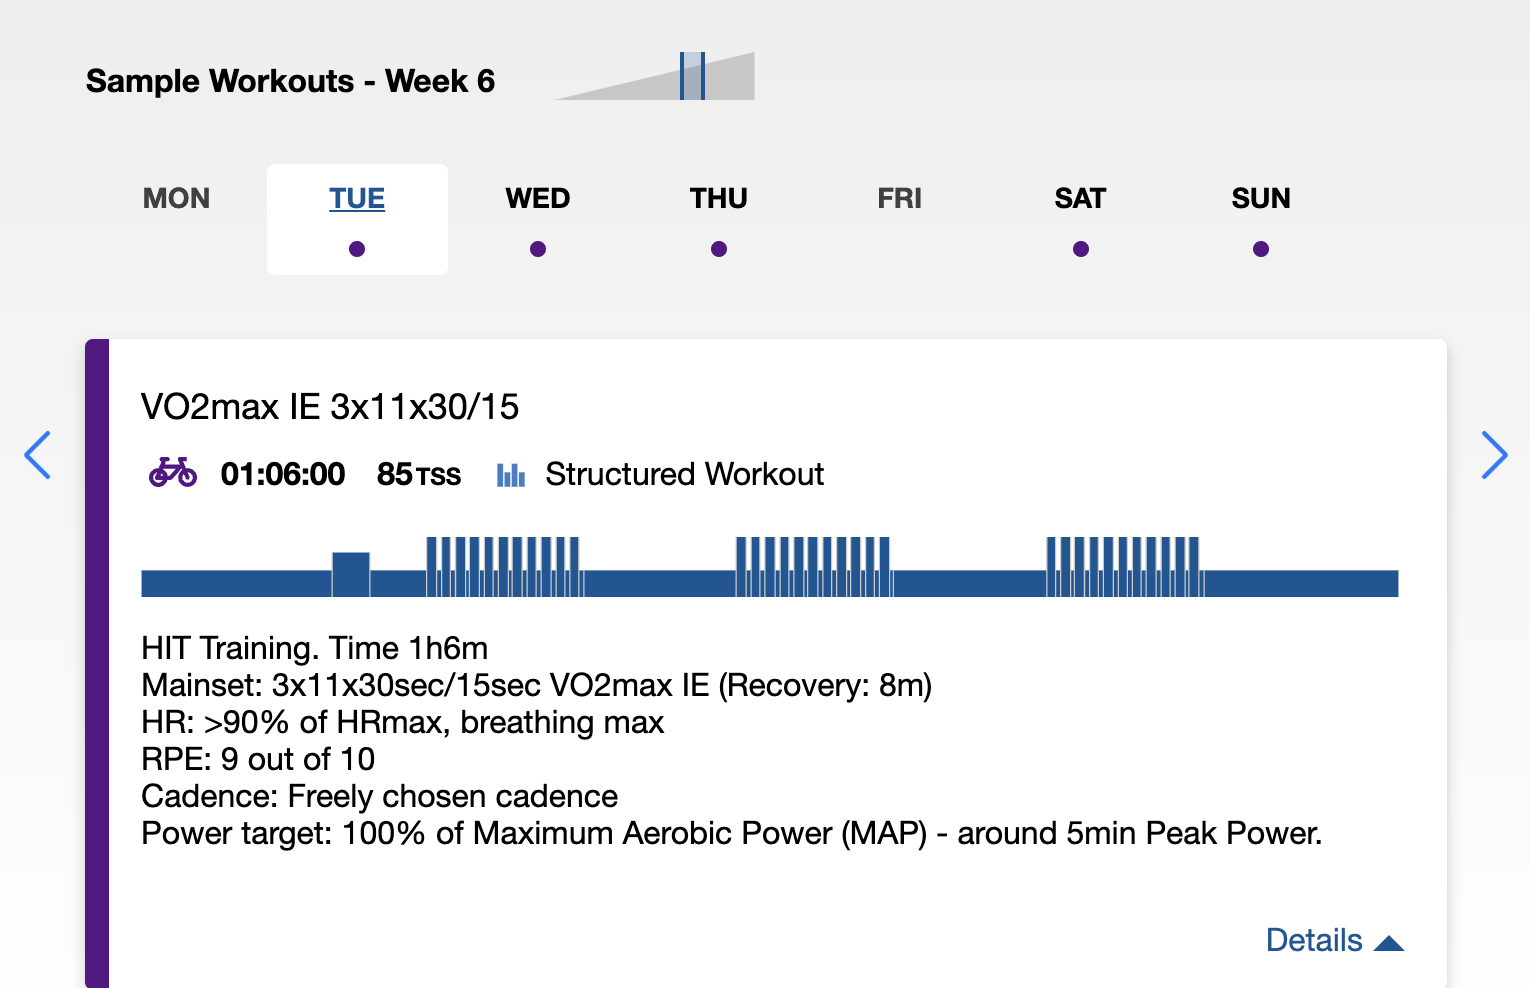 On grey background a trainingpeaks sample workout is shown in blue colour, with a detailed workout description below the workout.